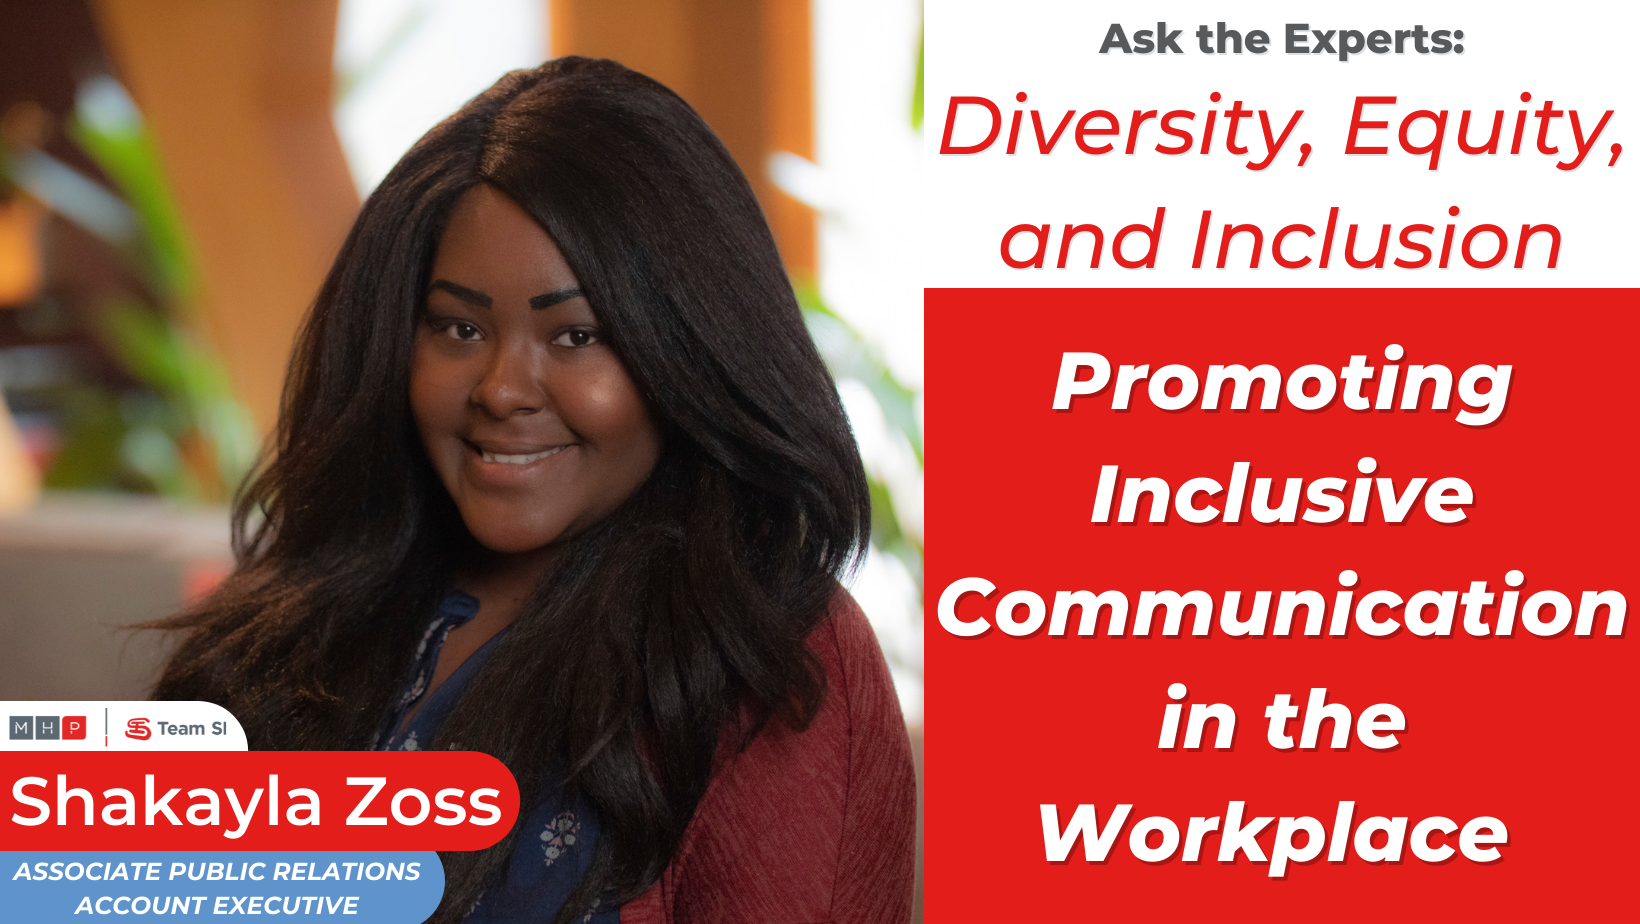 Shakayla Zoss, DEI Committee member, details promoting inclusive communication in the workplace